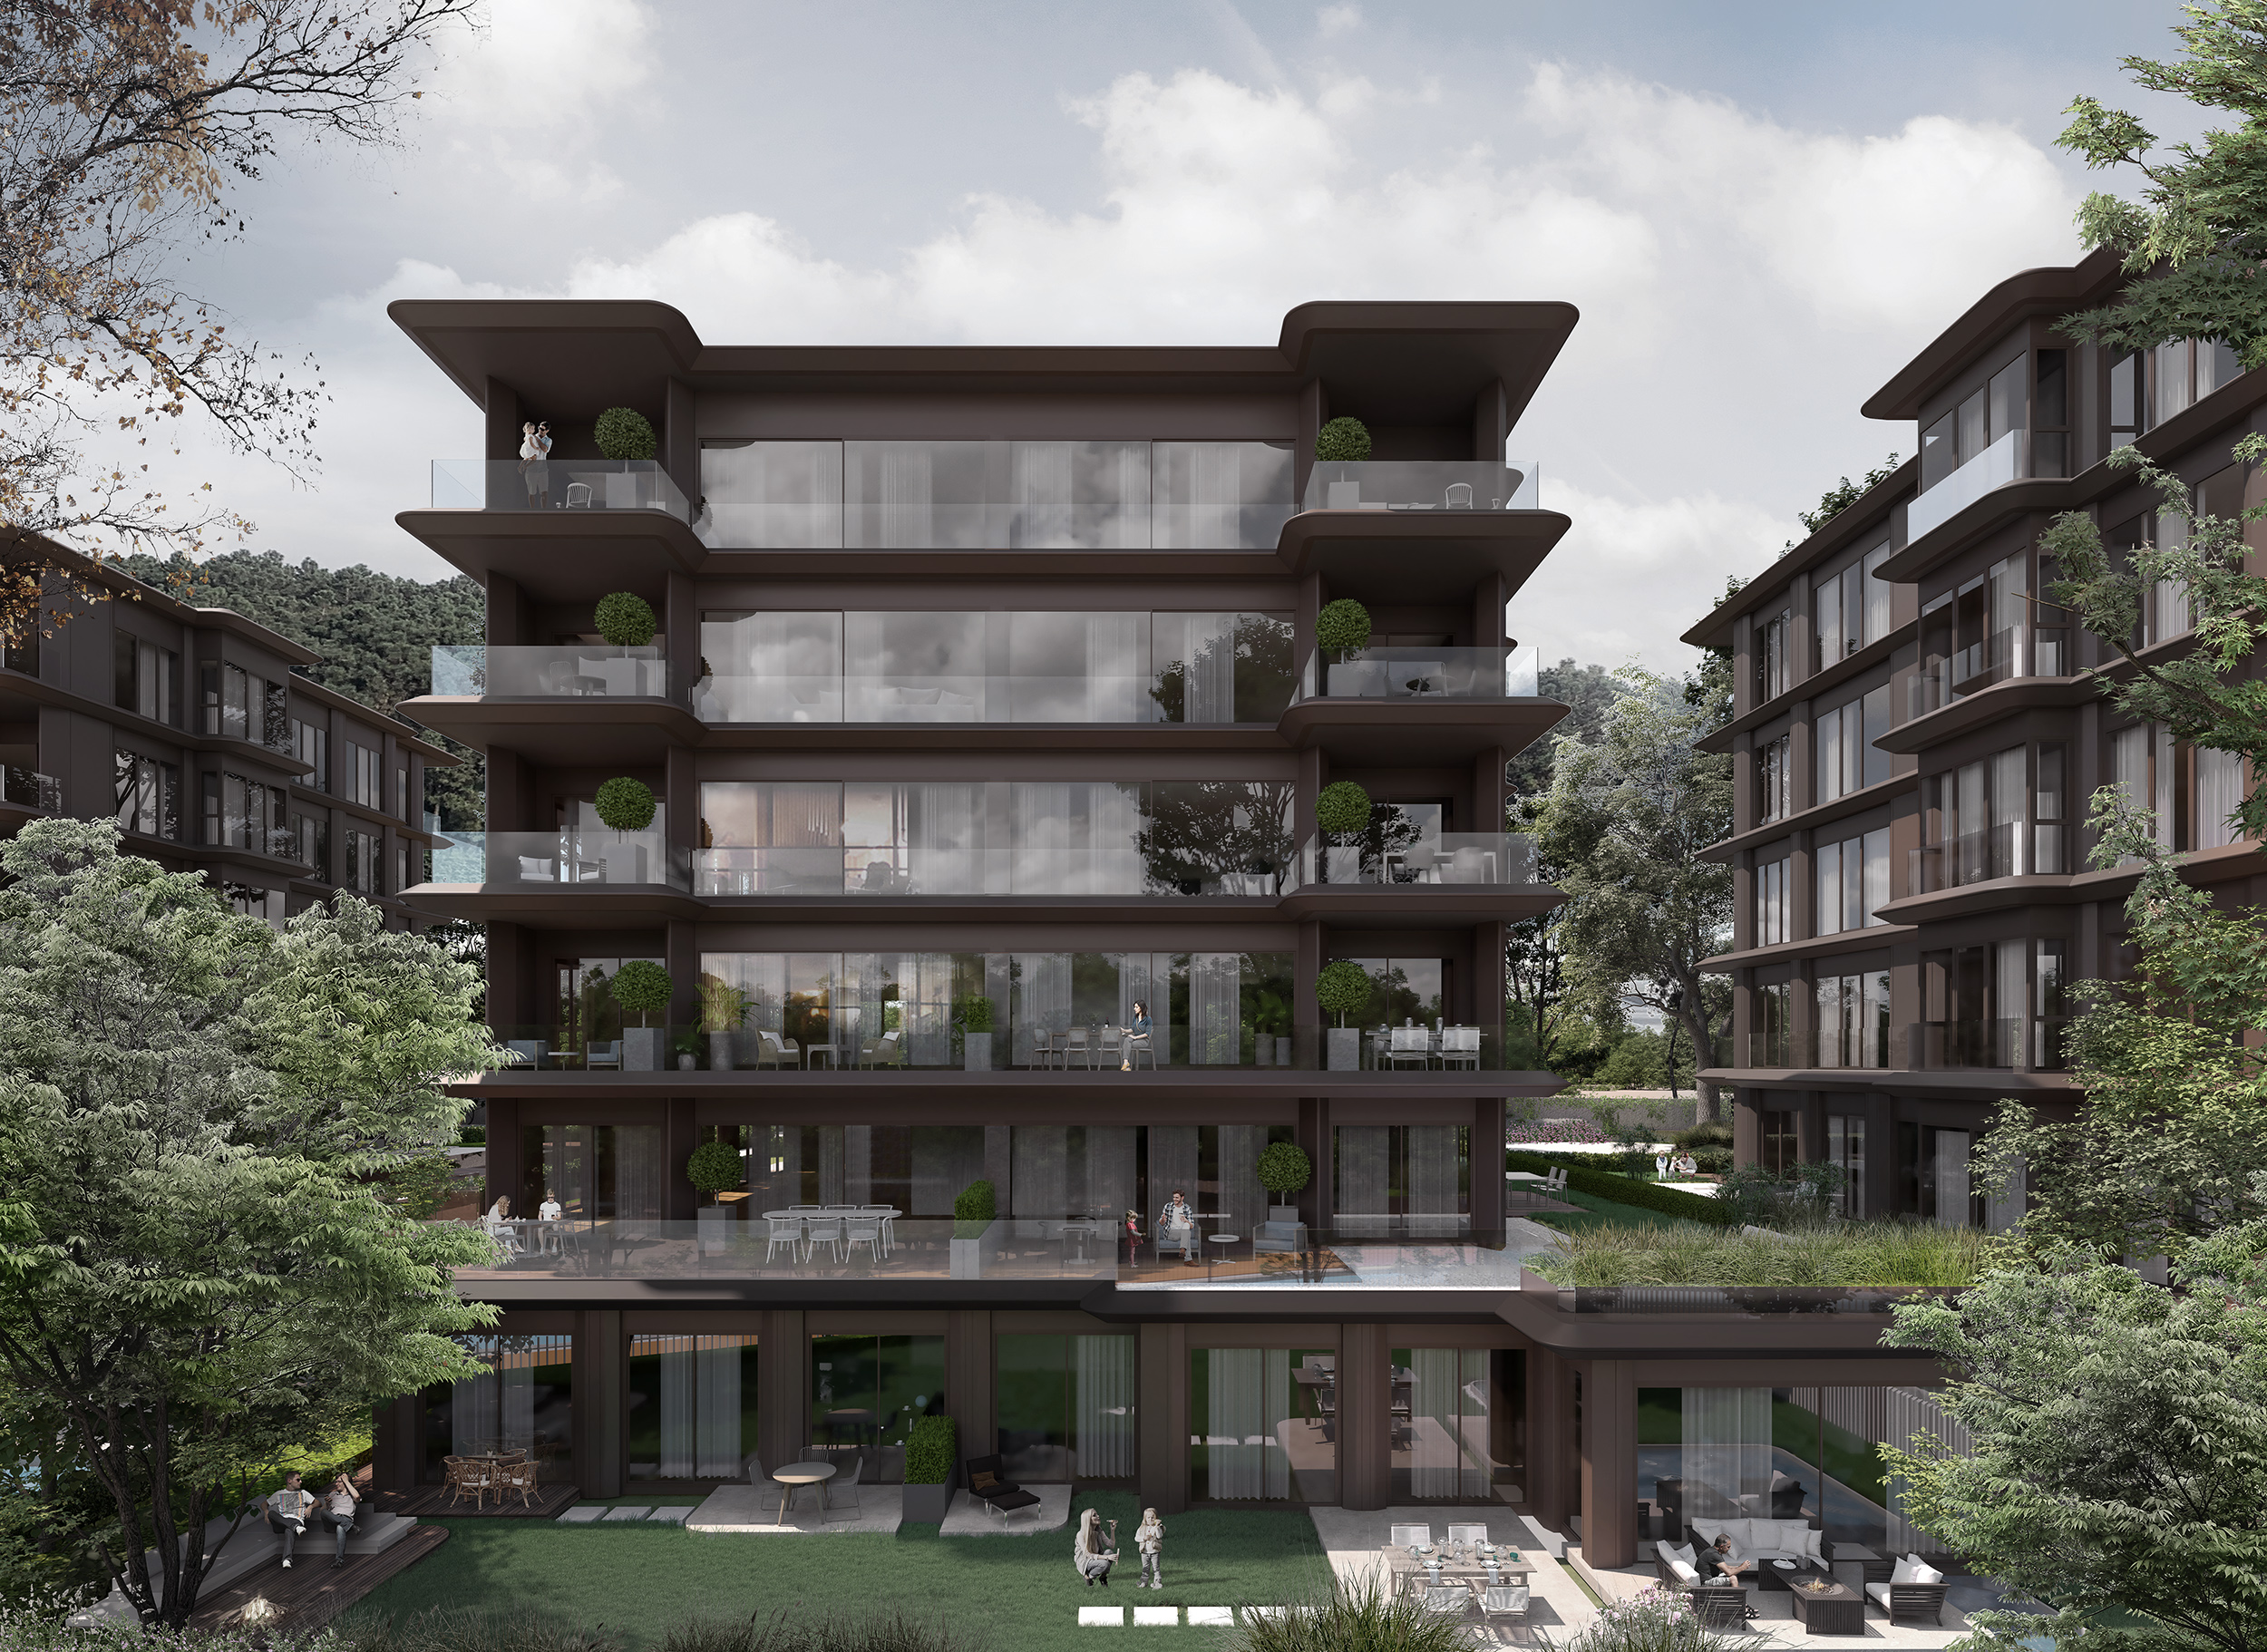 4 Bedrooms Luxury Residences in the forest in Istanbul